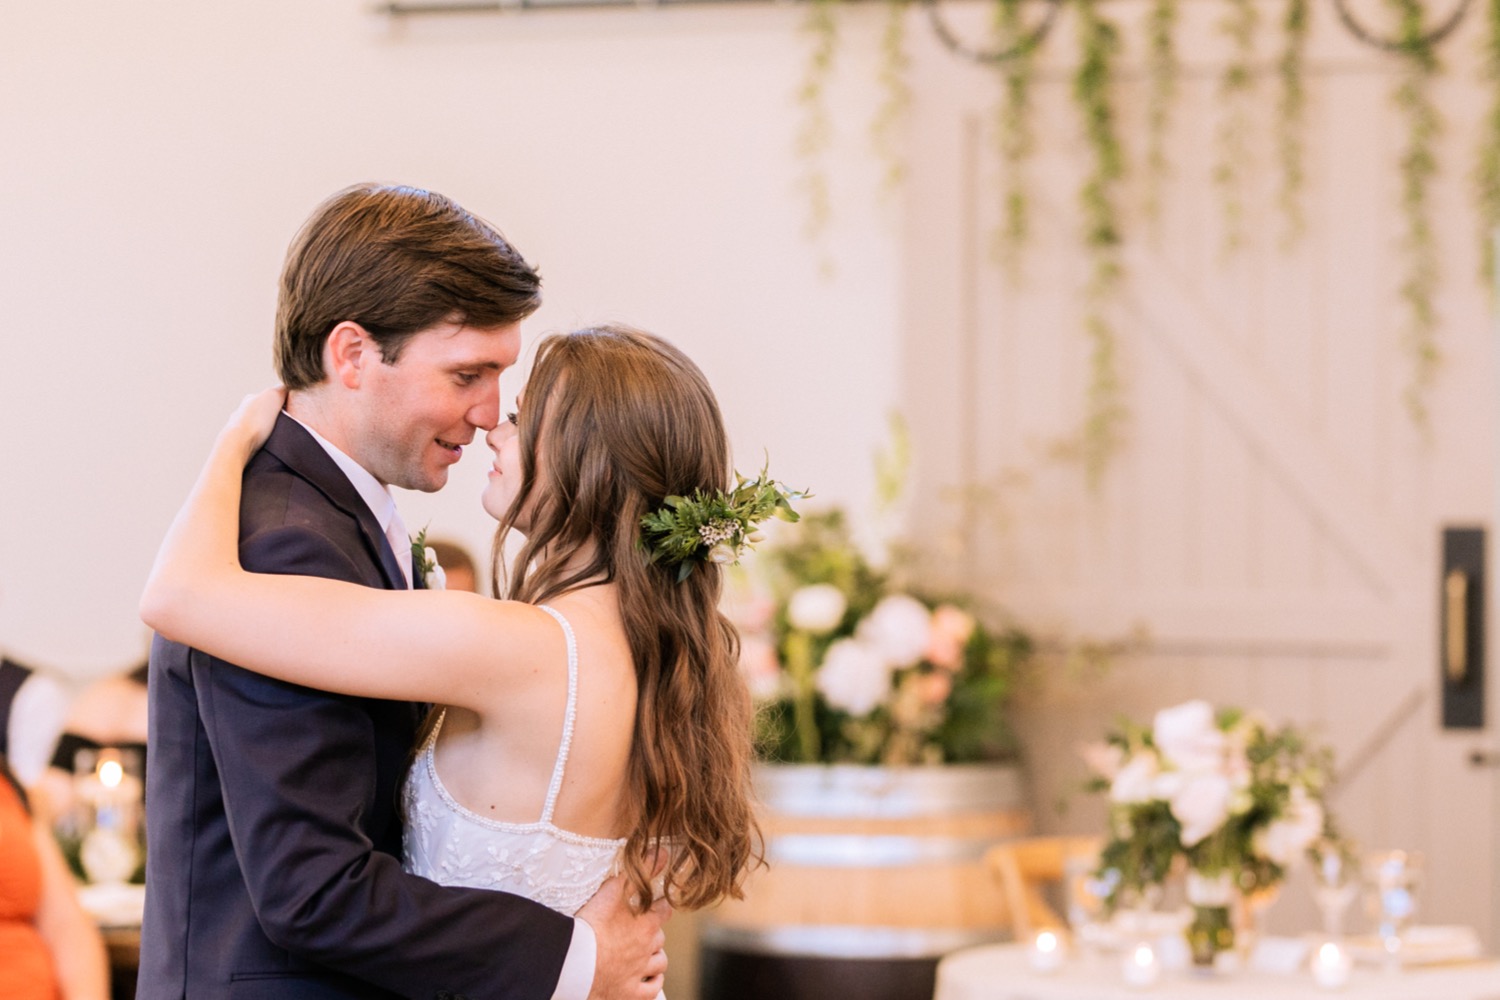 Bride and groom share first dance during their wedding reception in Charlottesville, VA